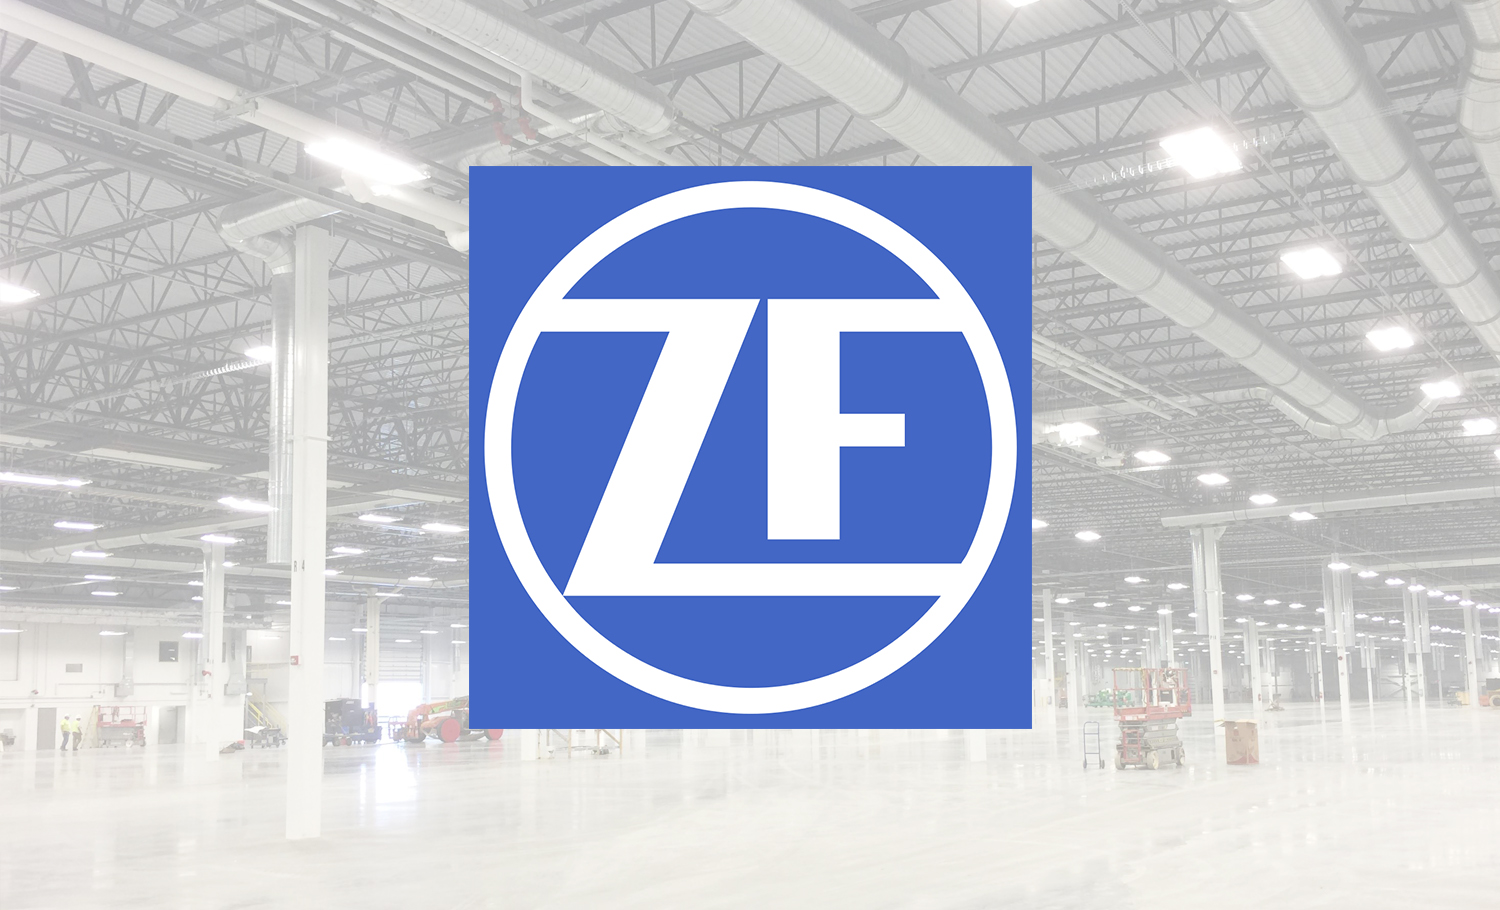 ZF_Cover_Port